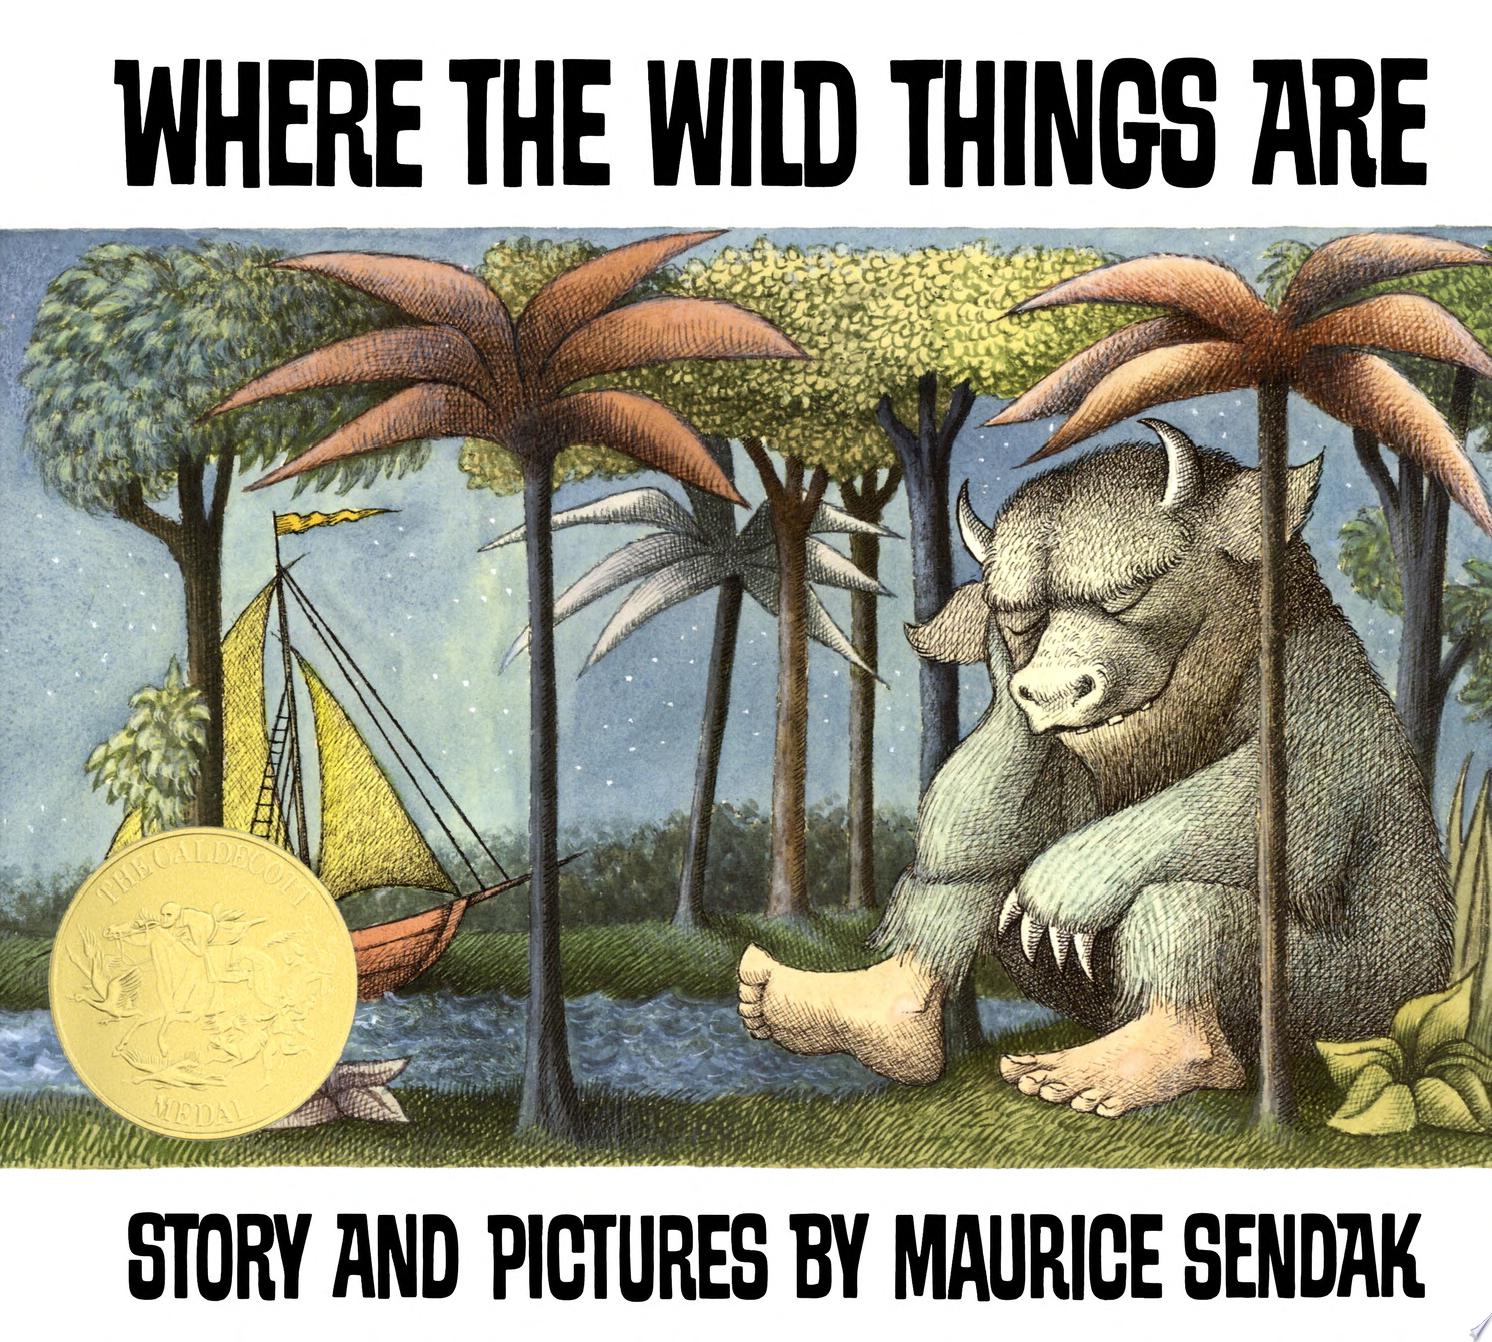 Image for "Where the Wild Things Are"